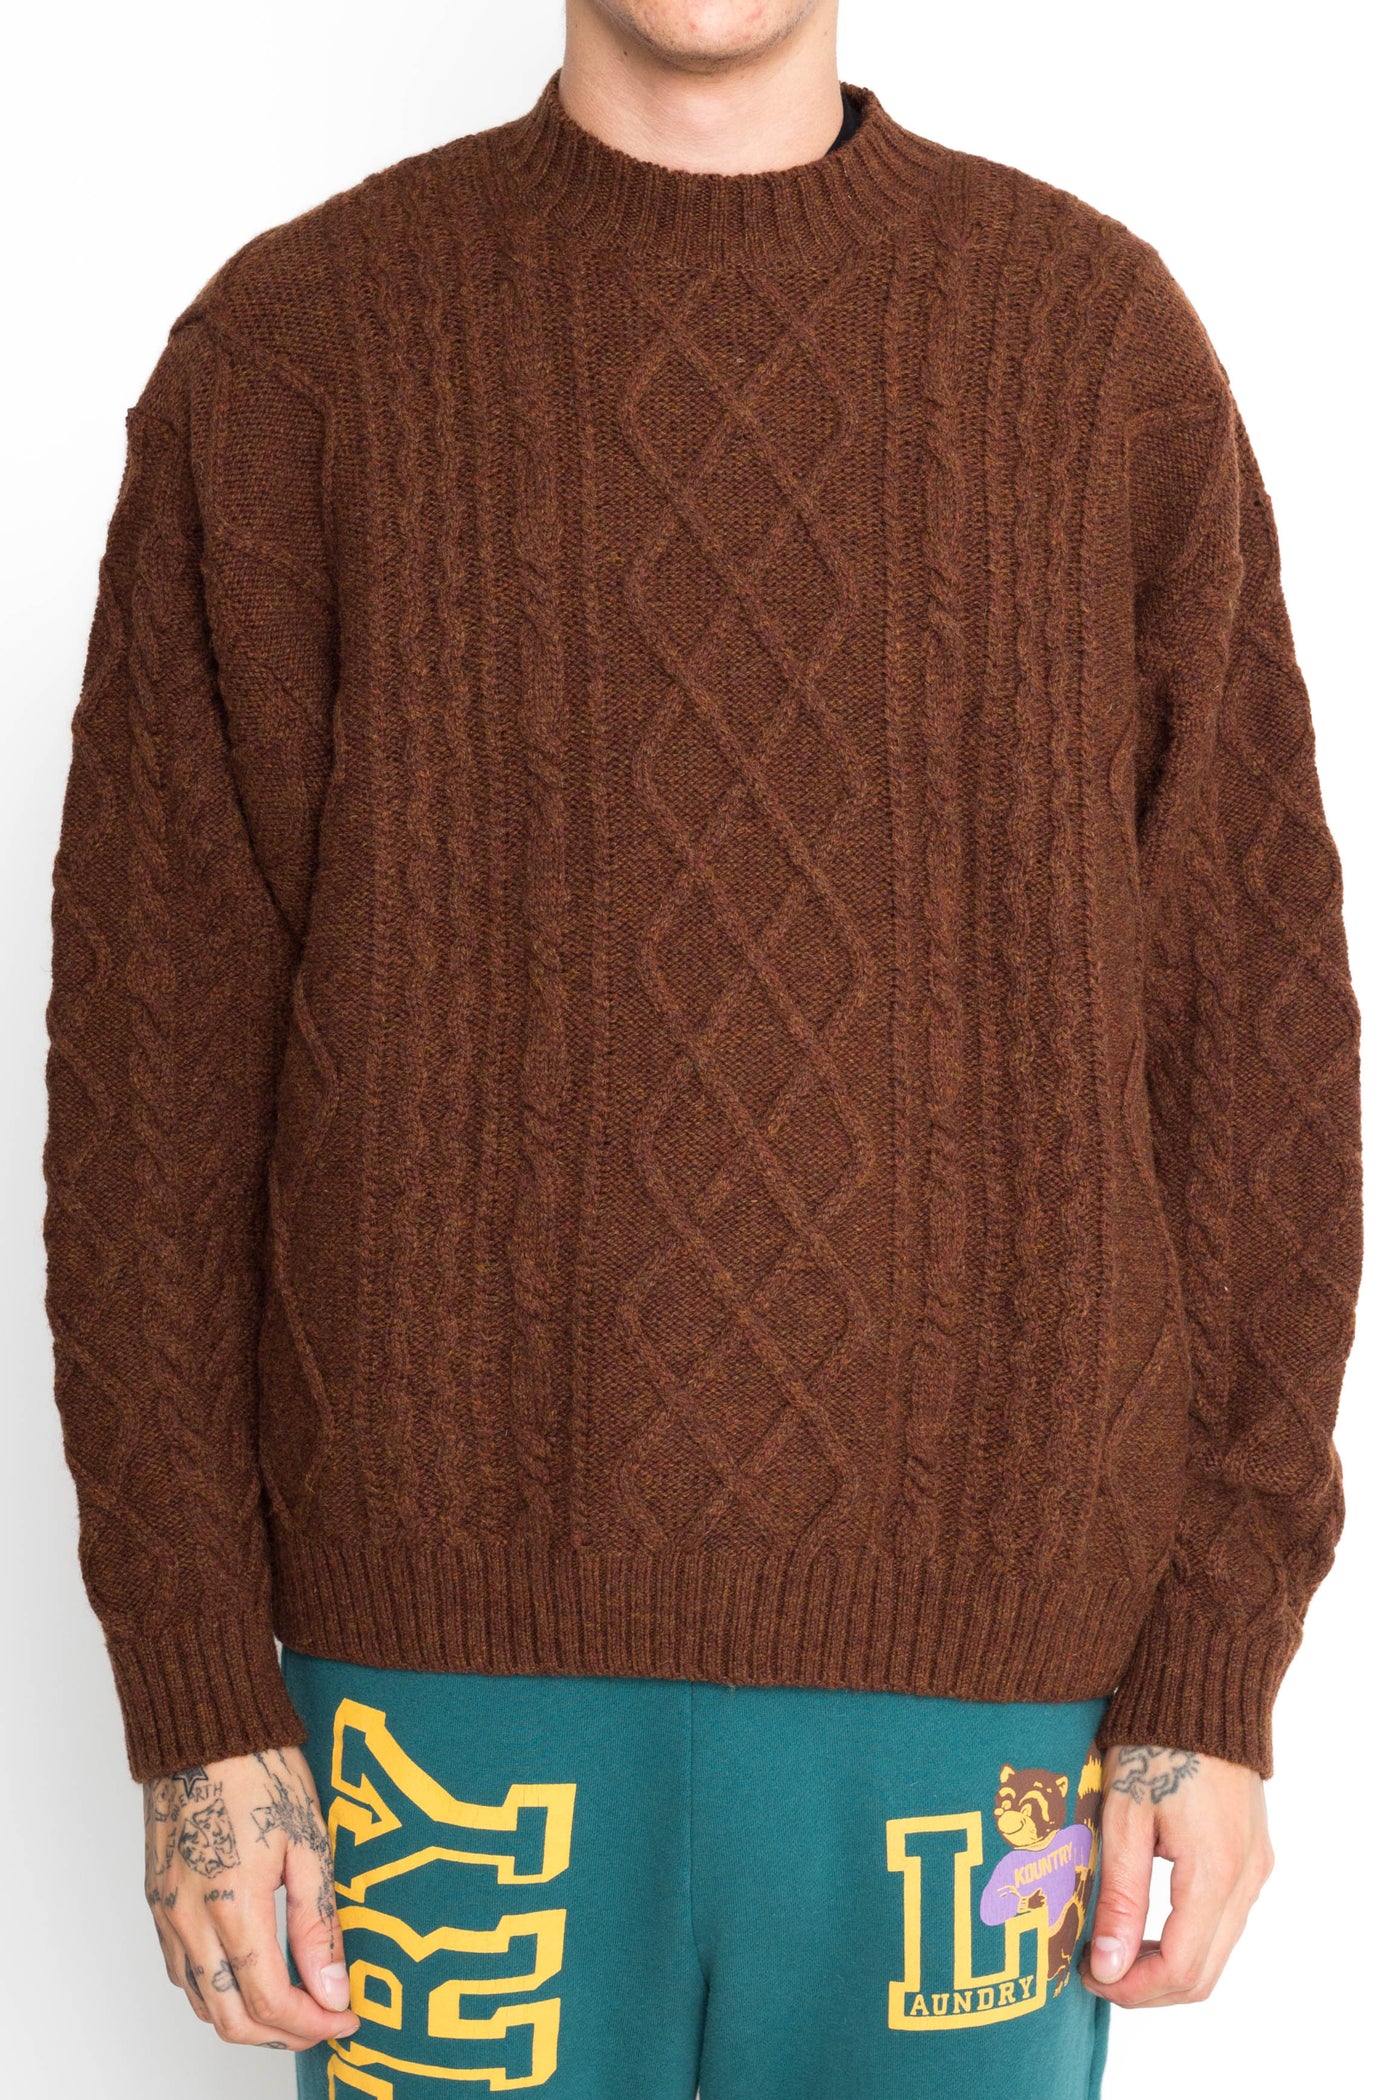 5G Wool Cable Knit Elbow-CAPITAL Crew Sweater - Brown